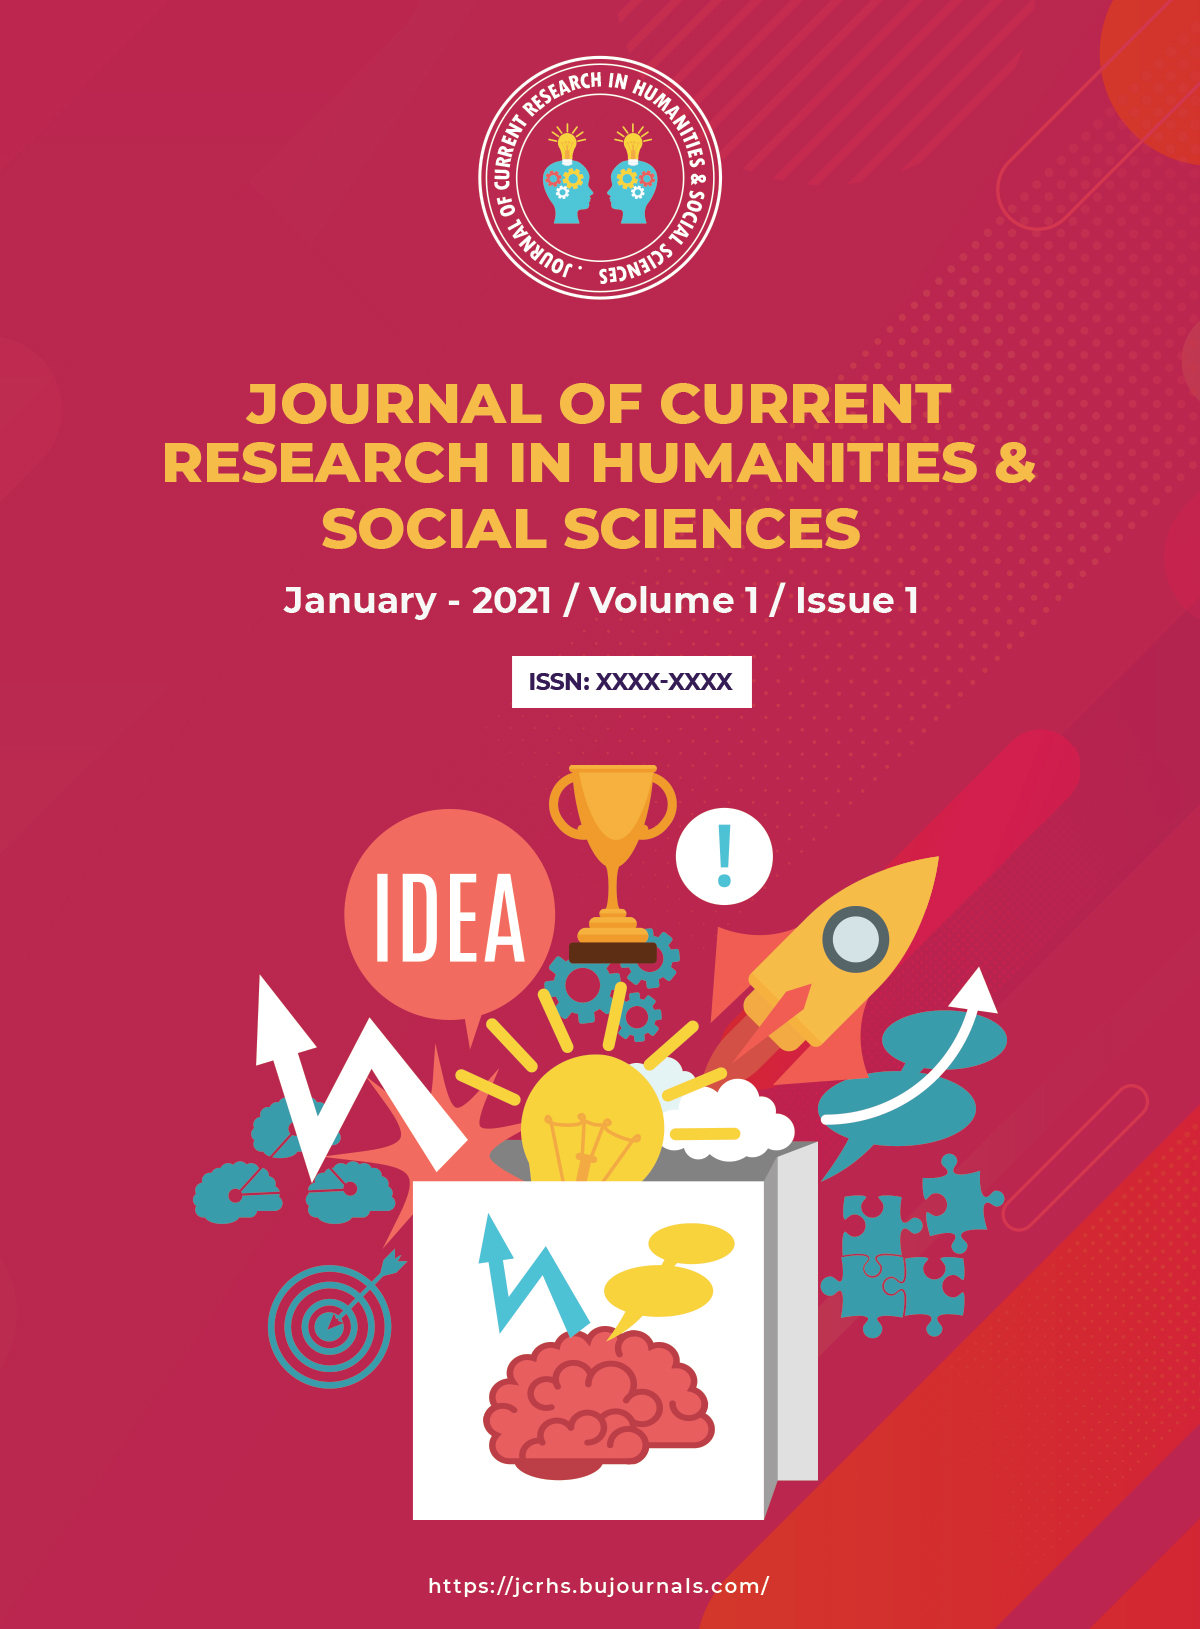 Journal of Current Research in Humanities & Social Sciences